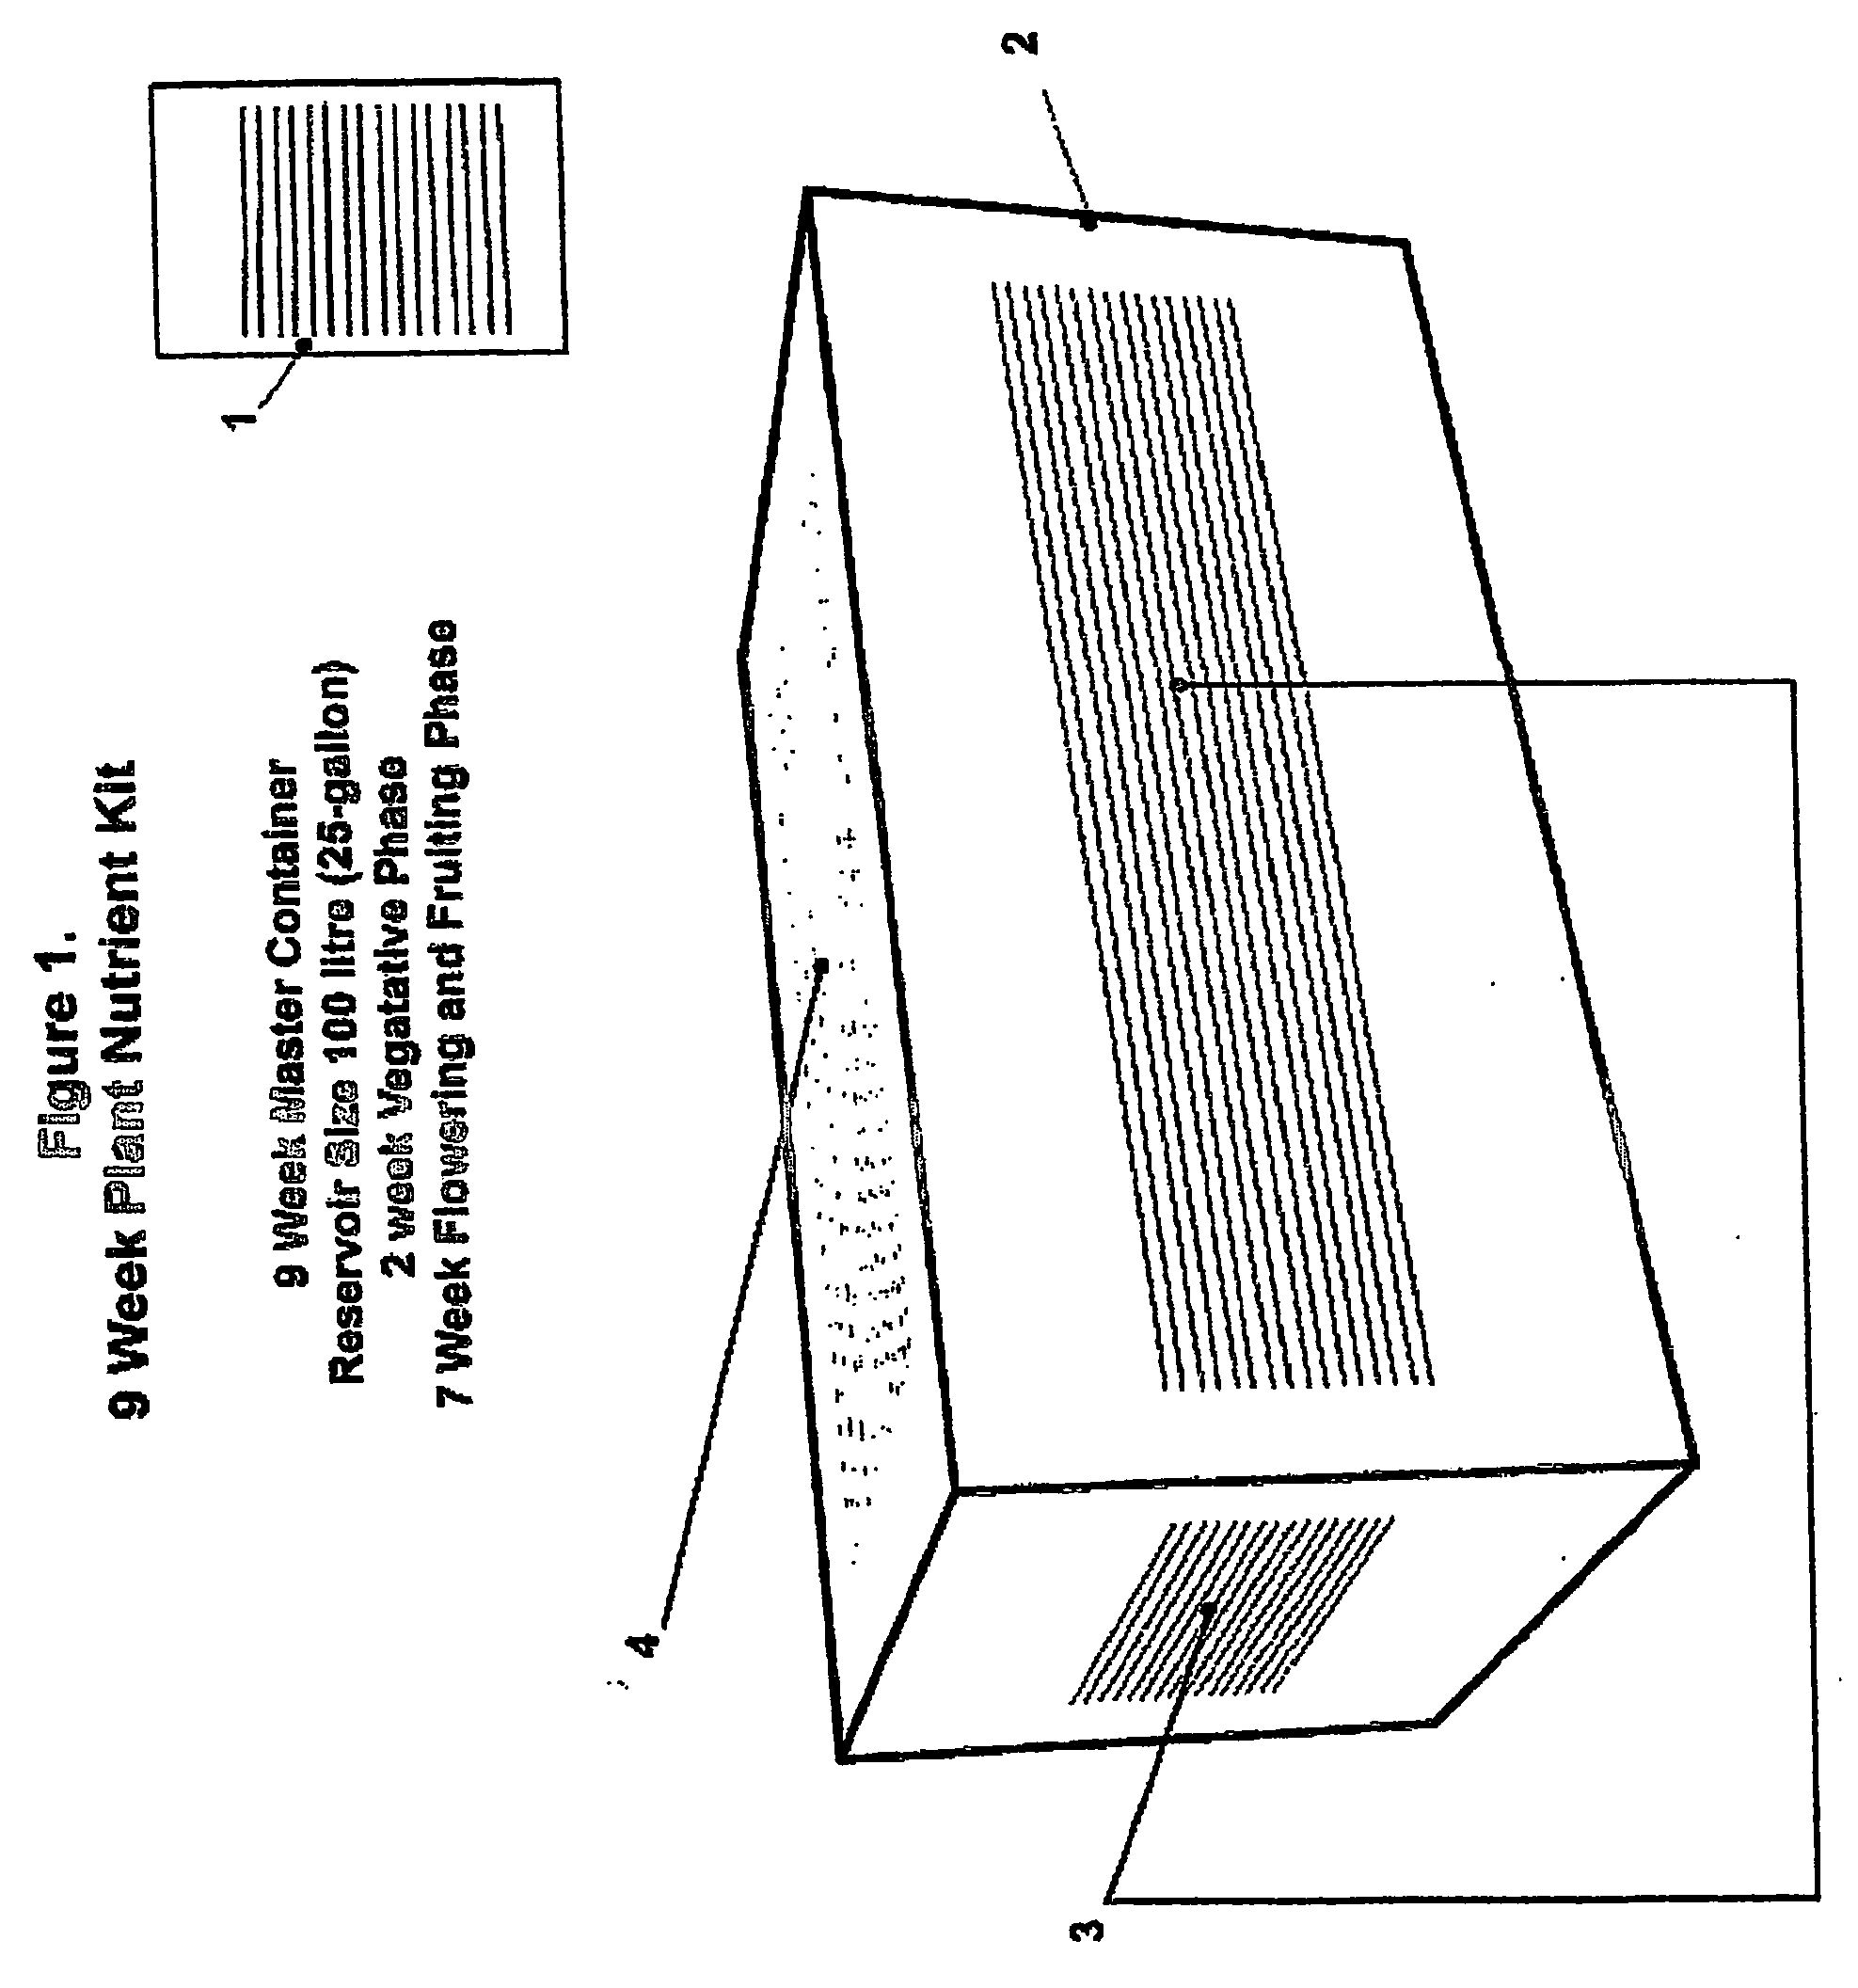 Hydroponic plant nutrient kit and method of use